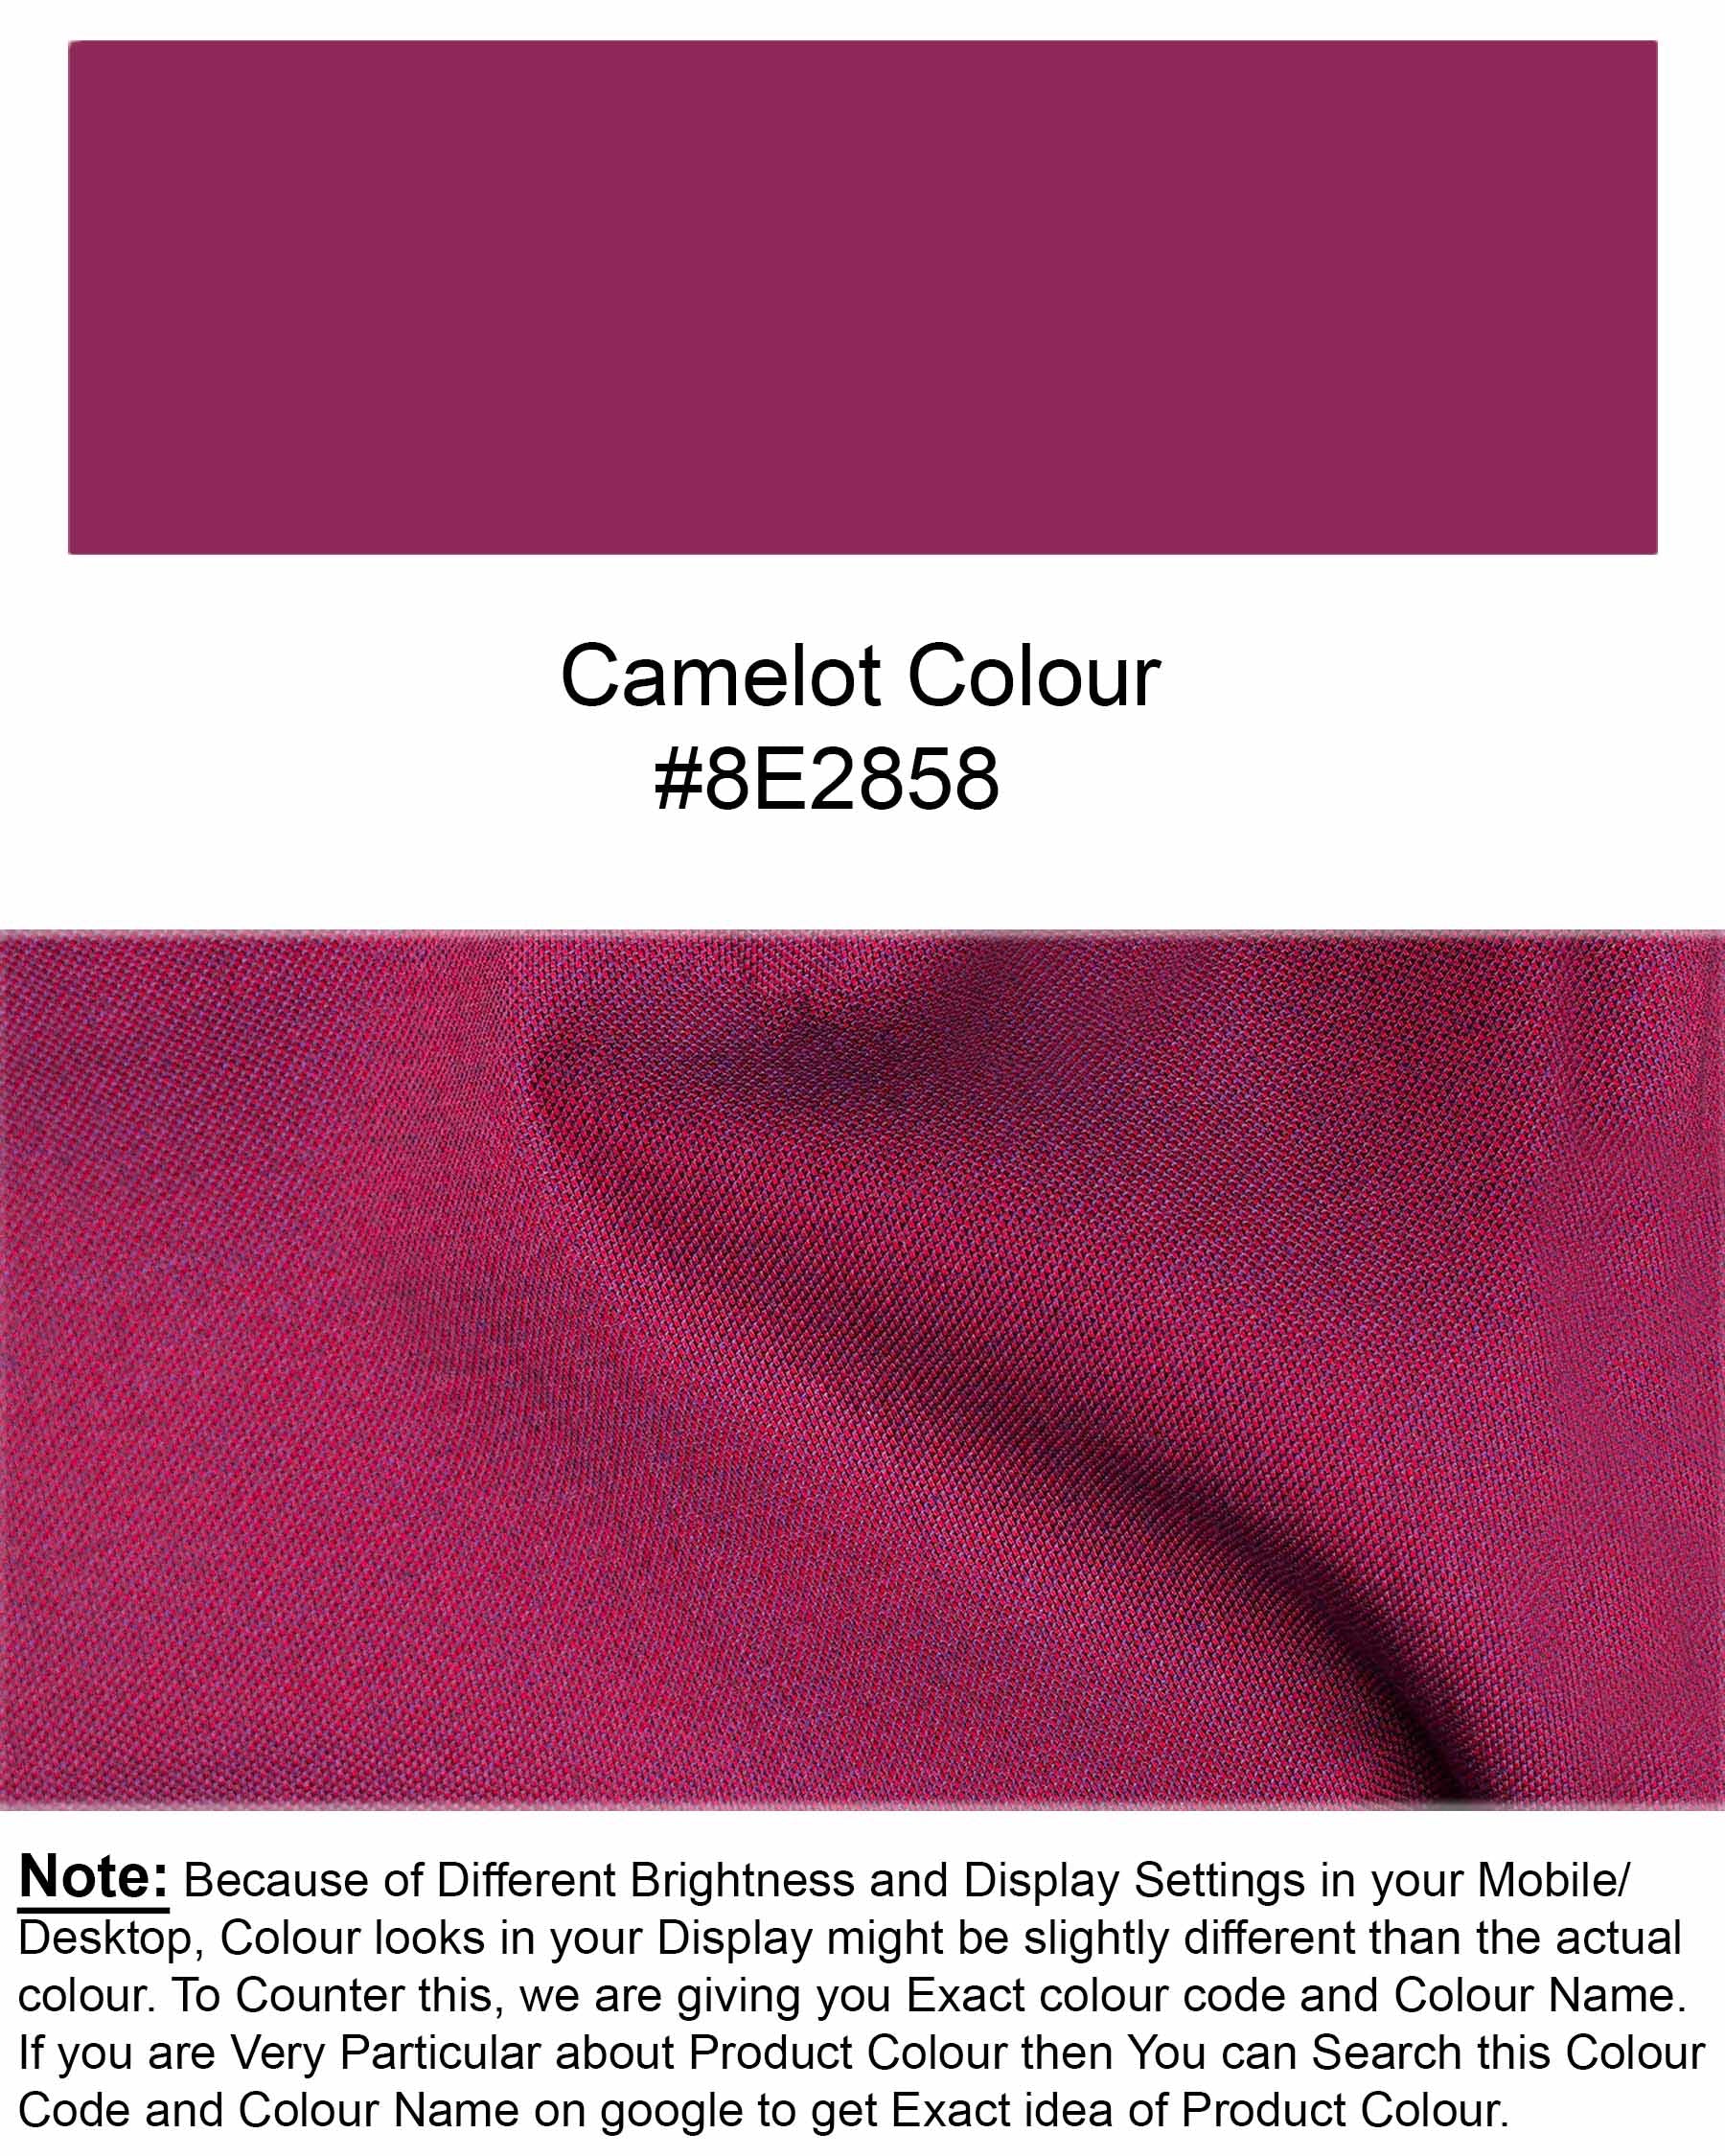 Camelot Pink Chambray Dobby Textured Premium Giza Cotton Shirt 7157-BD-38,7157-BD-H-38,7157-BD-39,7157-BD-H-39,7157-BD-40,7157-BD-H-40,7157-BD-42,7157-BD-H-42,7157-BD-44,7157-BD-H-44,7157-BD-46,7157-BD-H-46,7157-BD-48,7157-BD-H-48,7157-BD-50,7157-BD-H-50,7157-BD-52,7157-BD-H-52